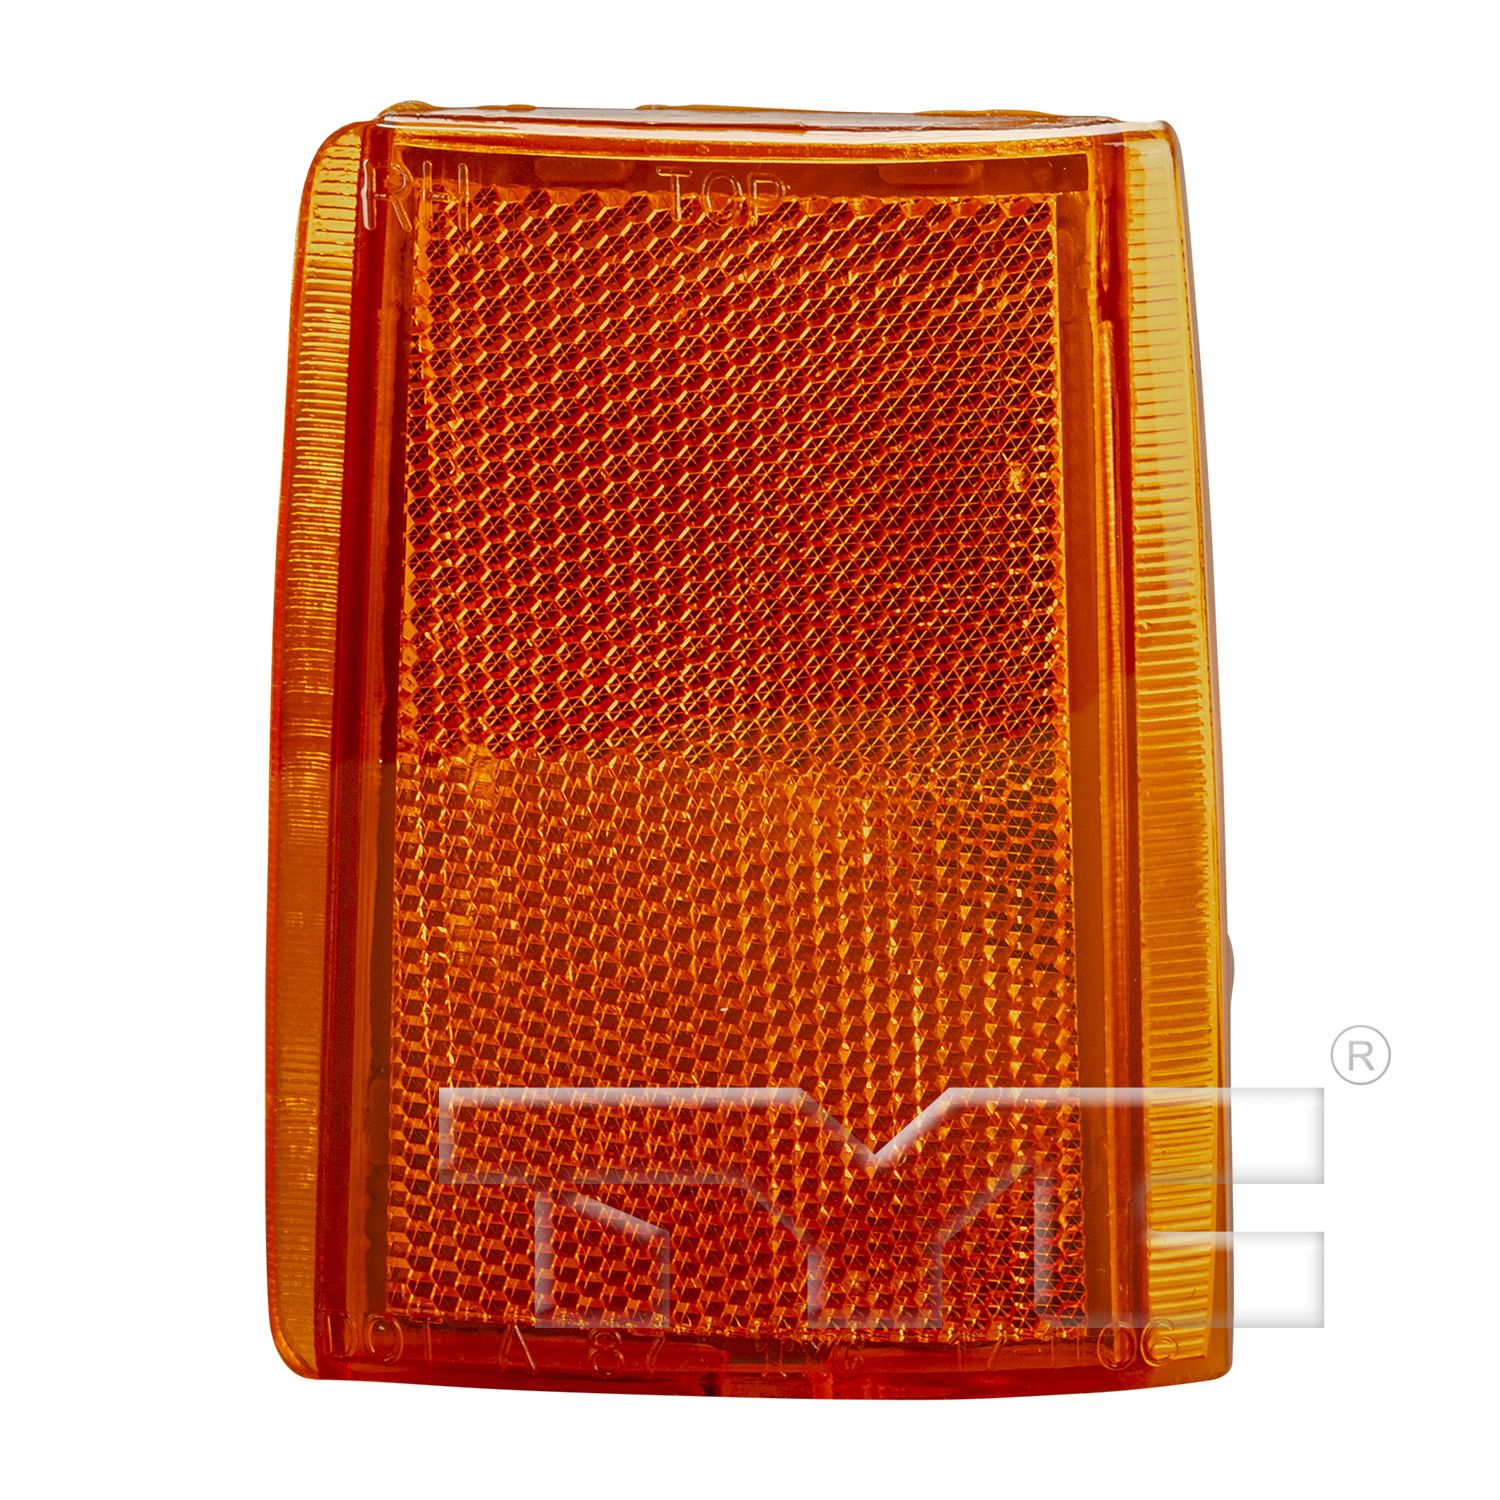 Aftermarket LAMPS for CHEVROLET - C1500, C1500,88-93,RT Front side reflector